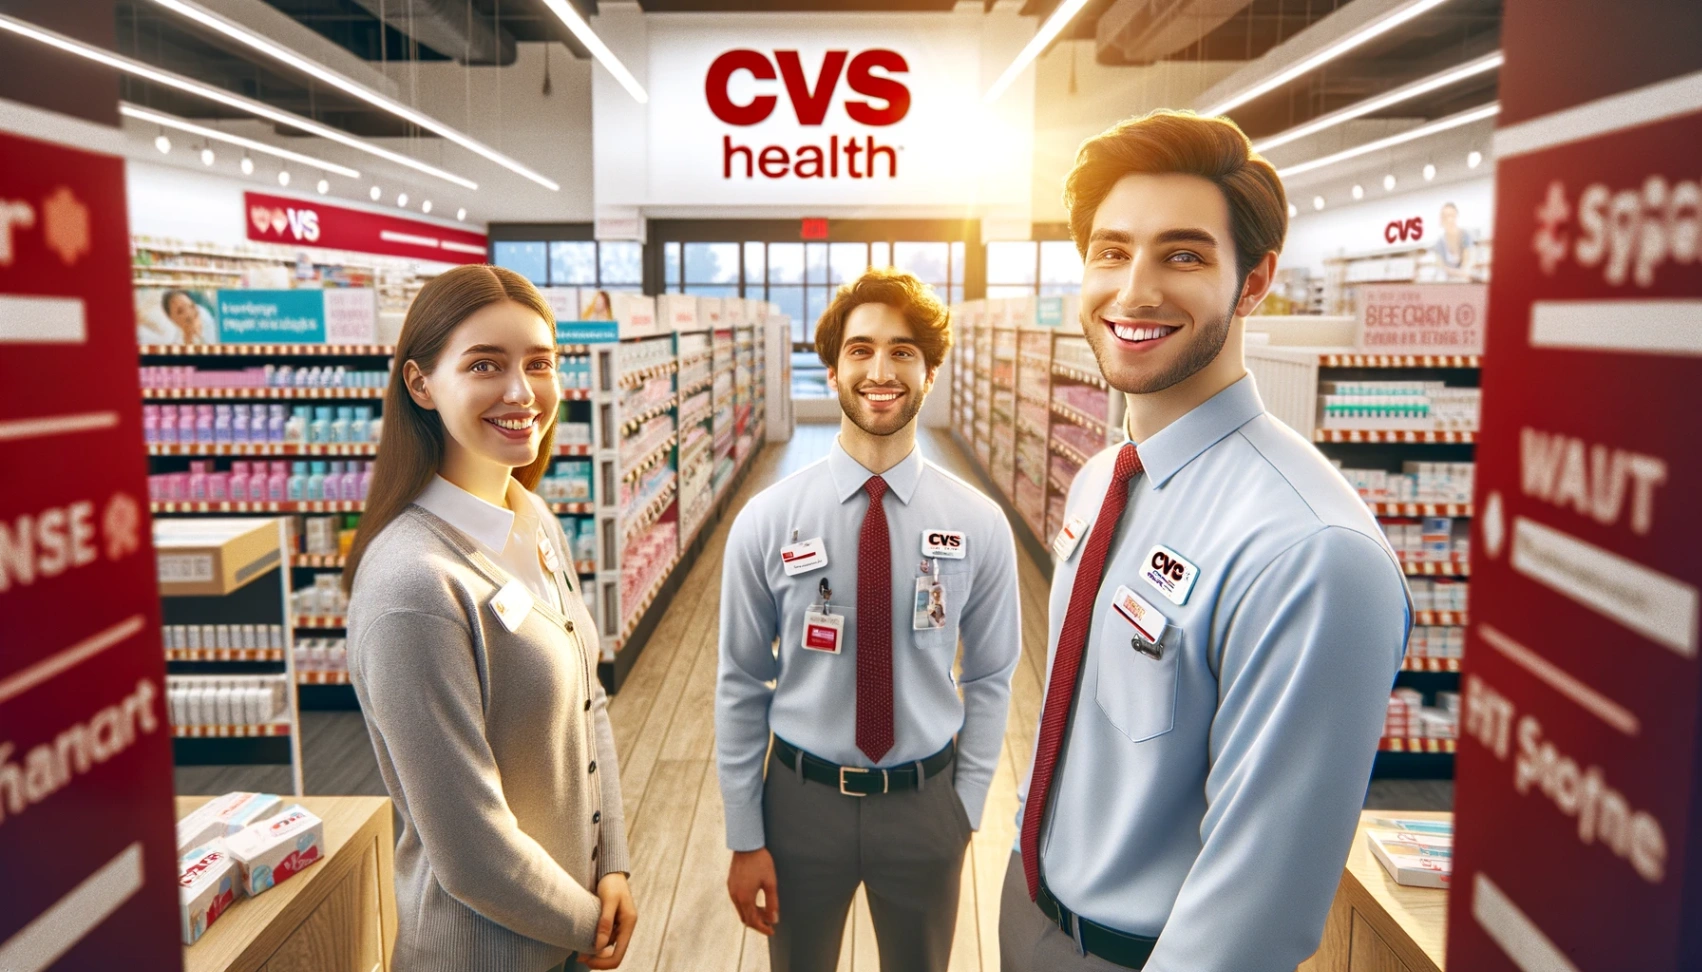 Exploring Career Opportunities at CVS Health: How to Apply Online